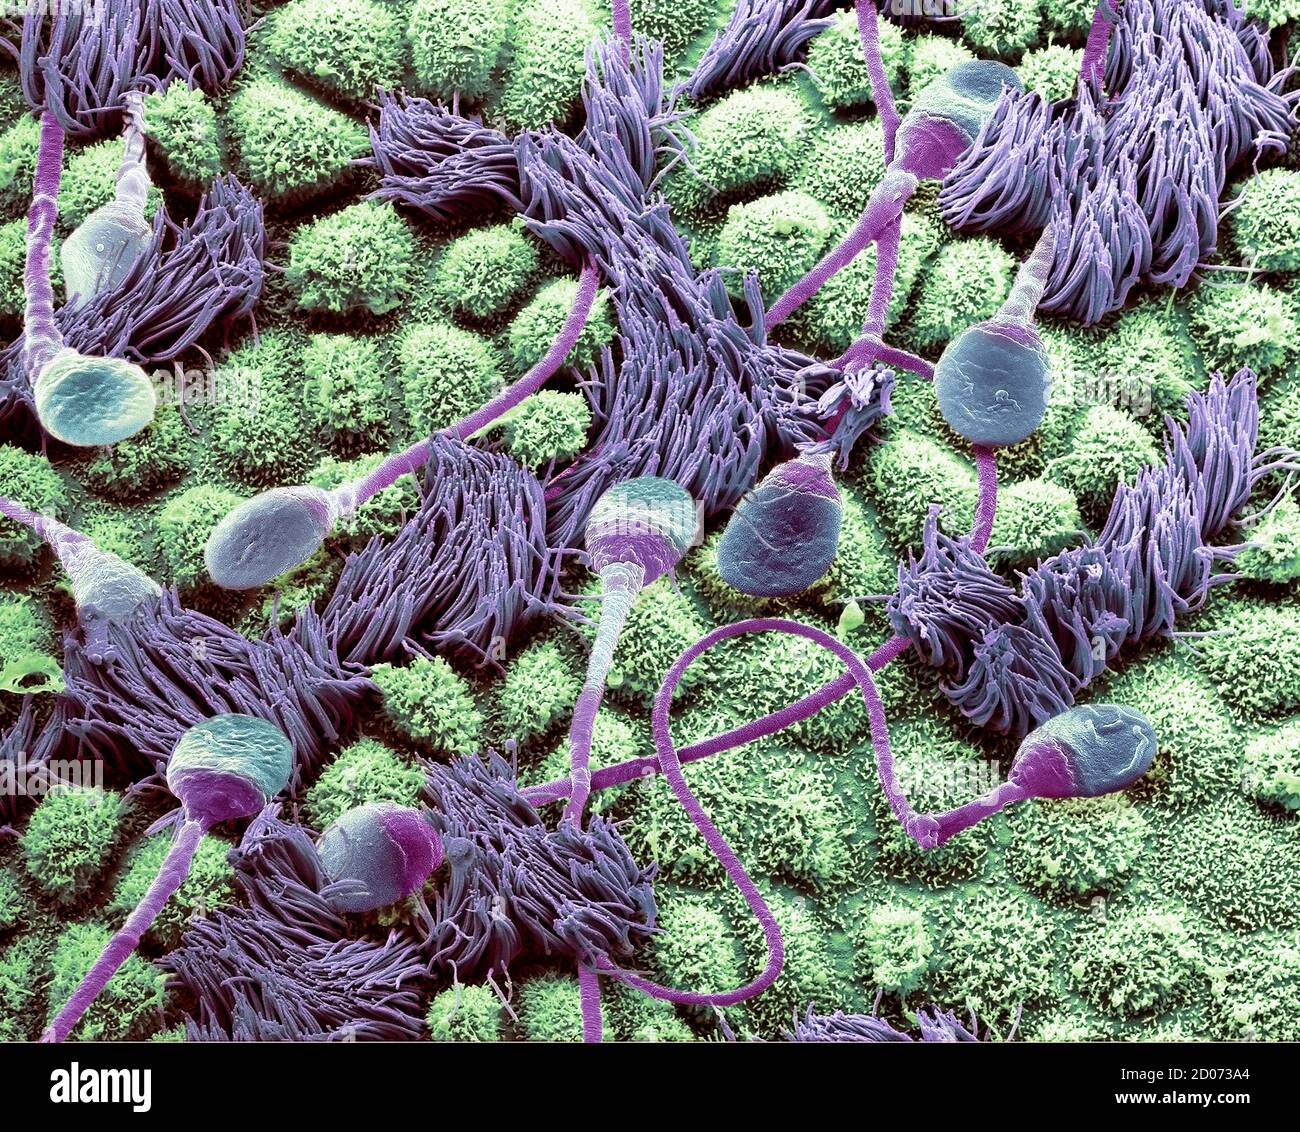 Sperm in a fallopian tube. Coloured composition scanning electron micrograph (SEM) of human sperm travelling through a fallopian tube (oviduct) of a f Stock Photo